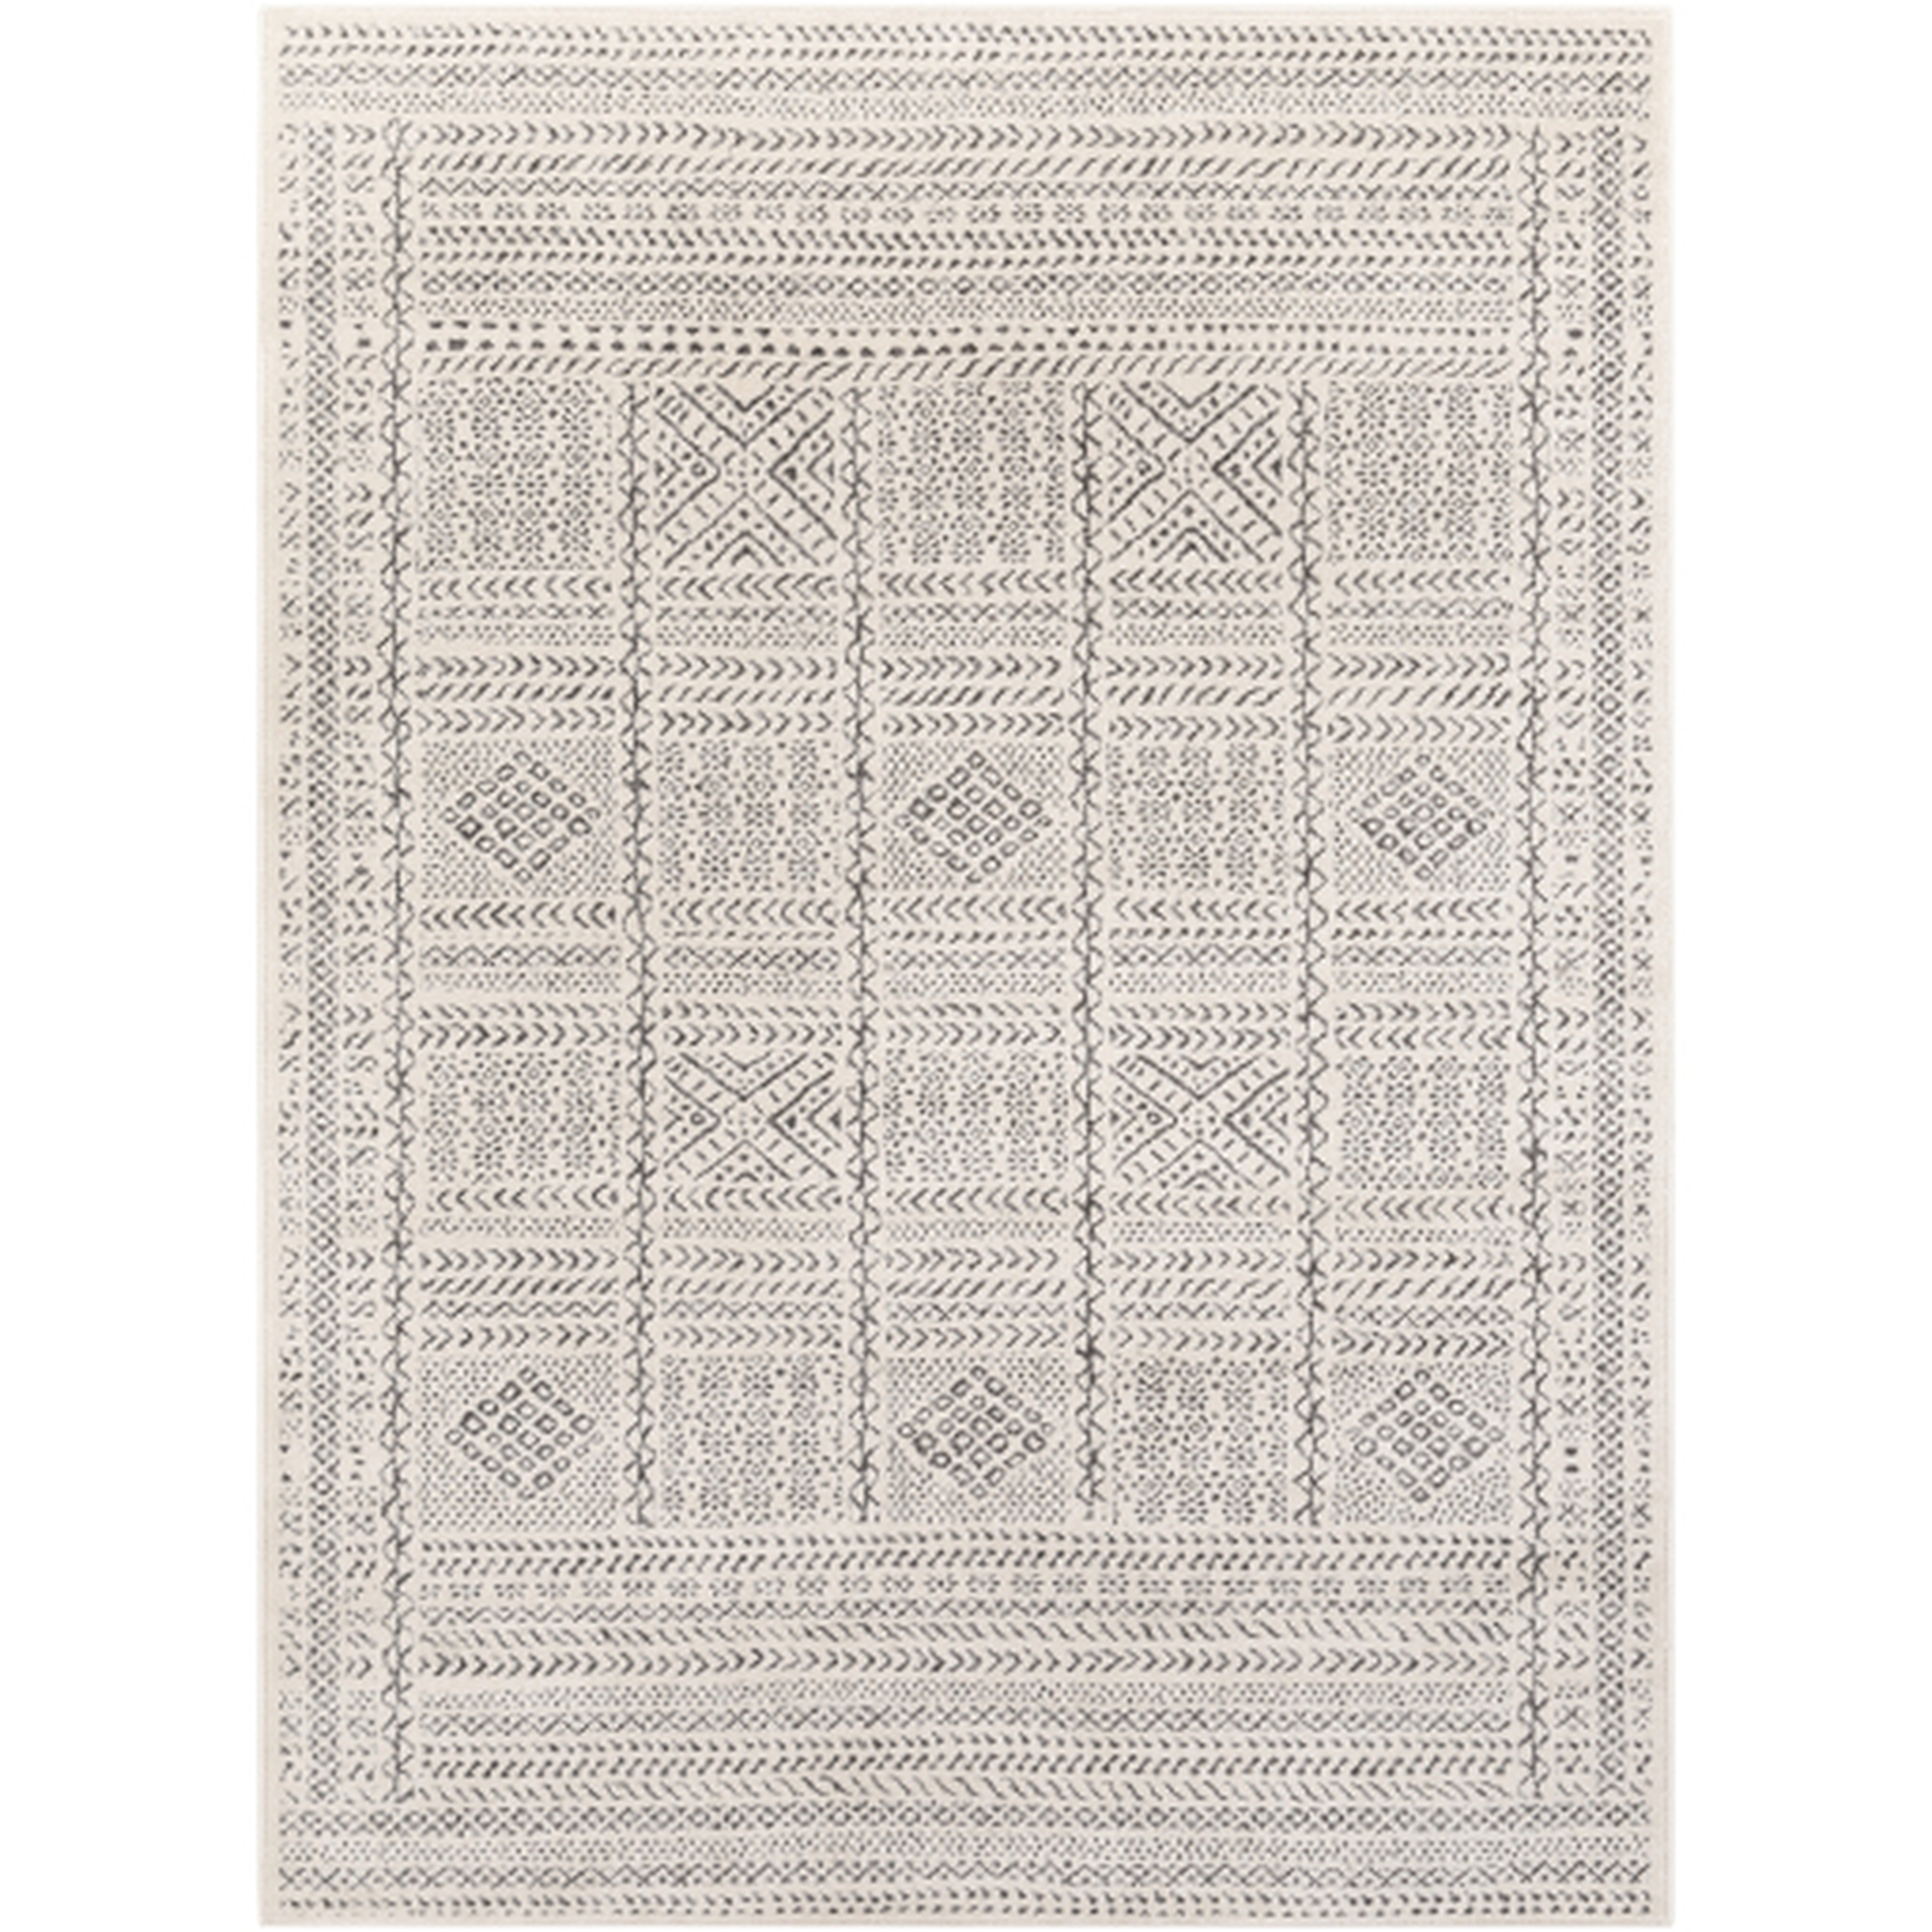 Blakely Rug, 7'10" x 10'2" - Cove Goods